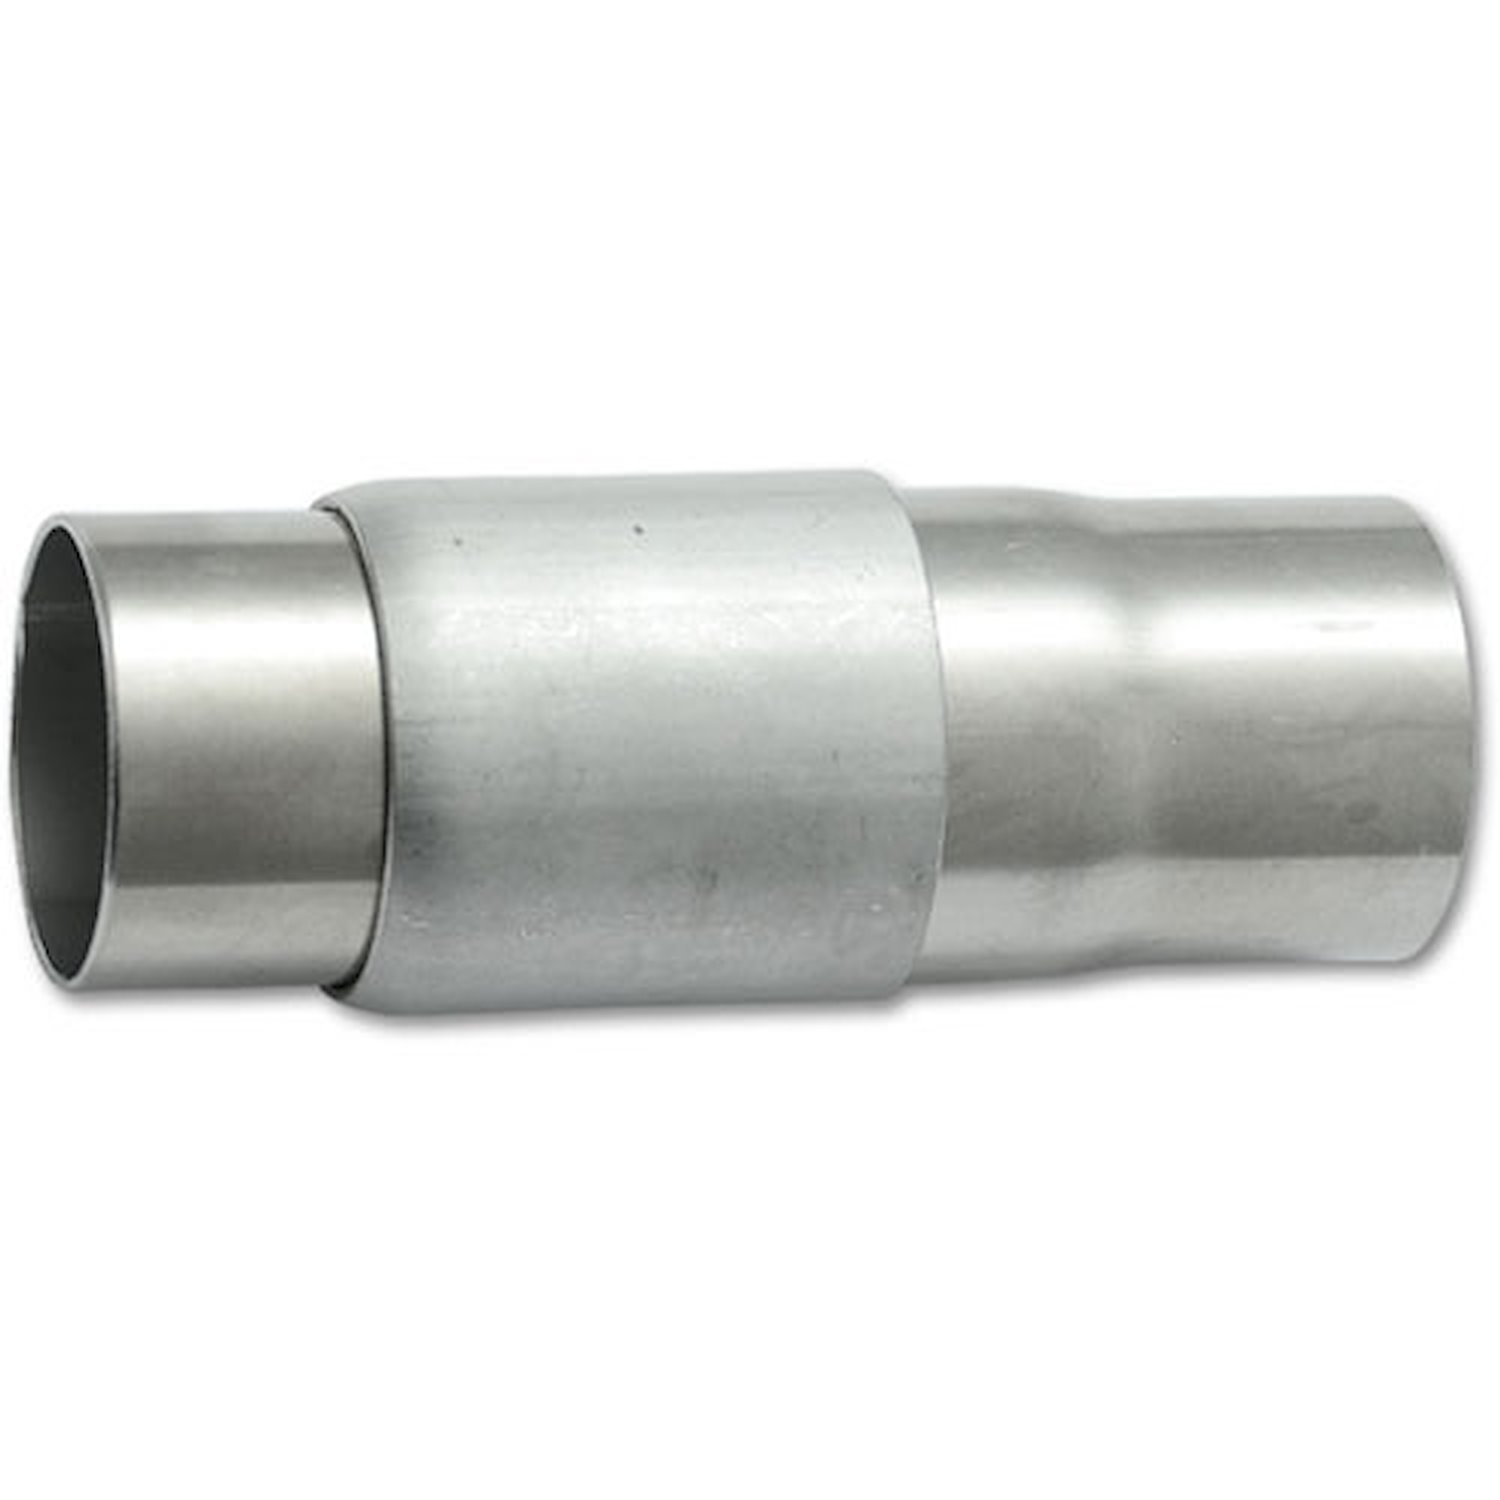 Double Slip Joint Fitting For use with 2-1/2